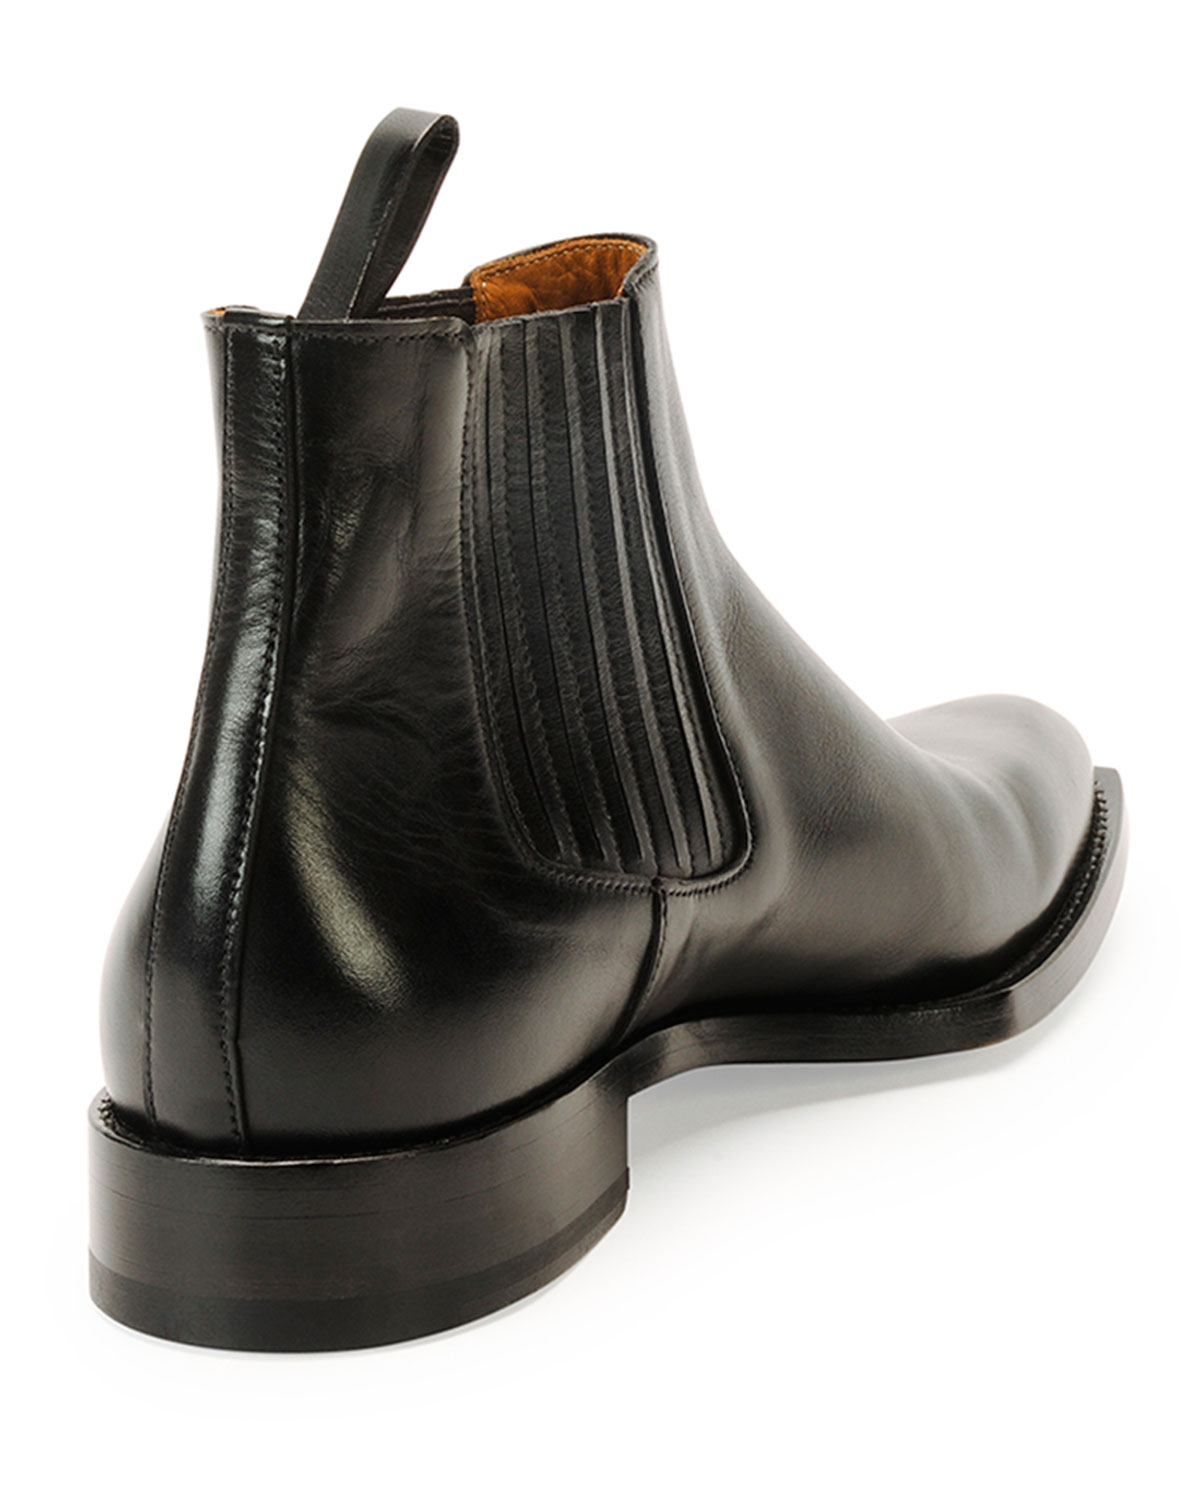 Lyst - Givenchy Norberto Leather Chelsea Boot in Black for Men